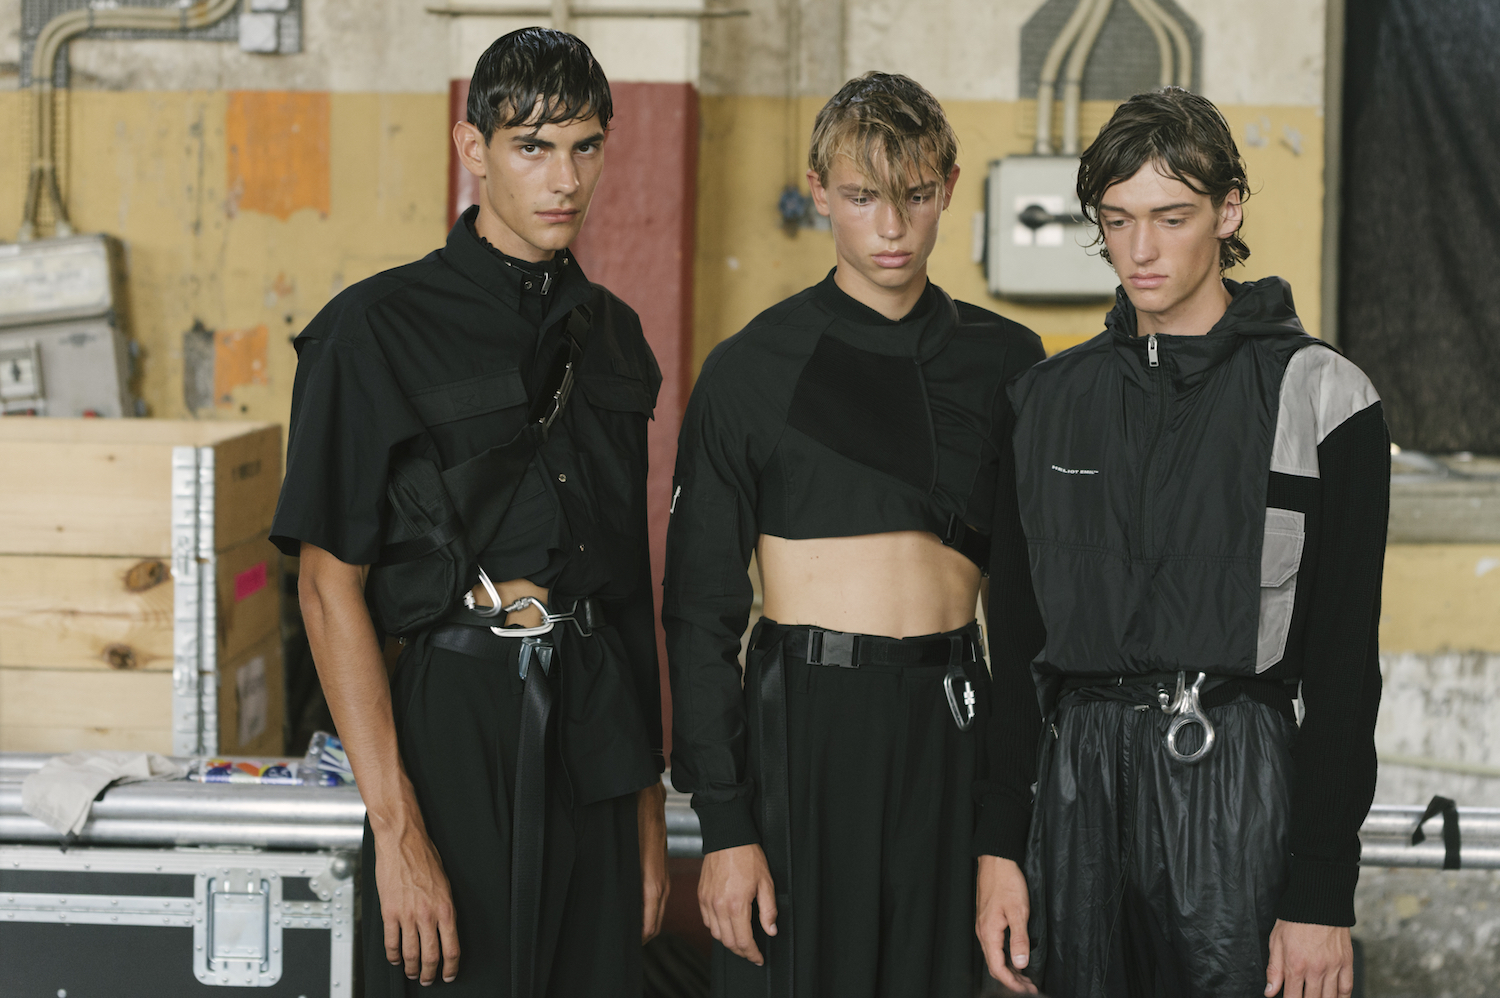 CPHFW: Backstage at HELIOT EMIL SS19 Show